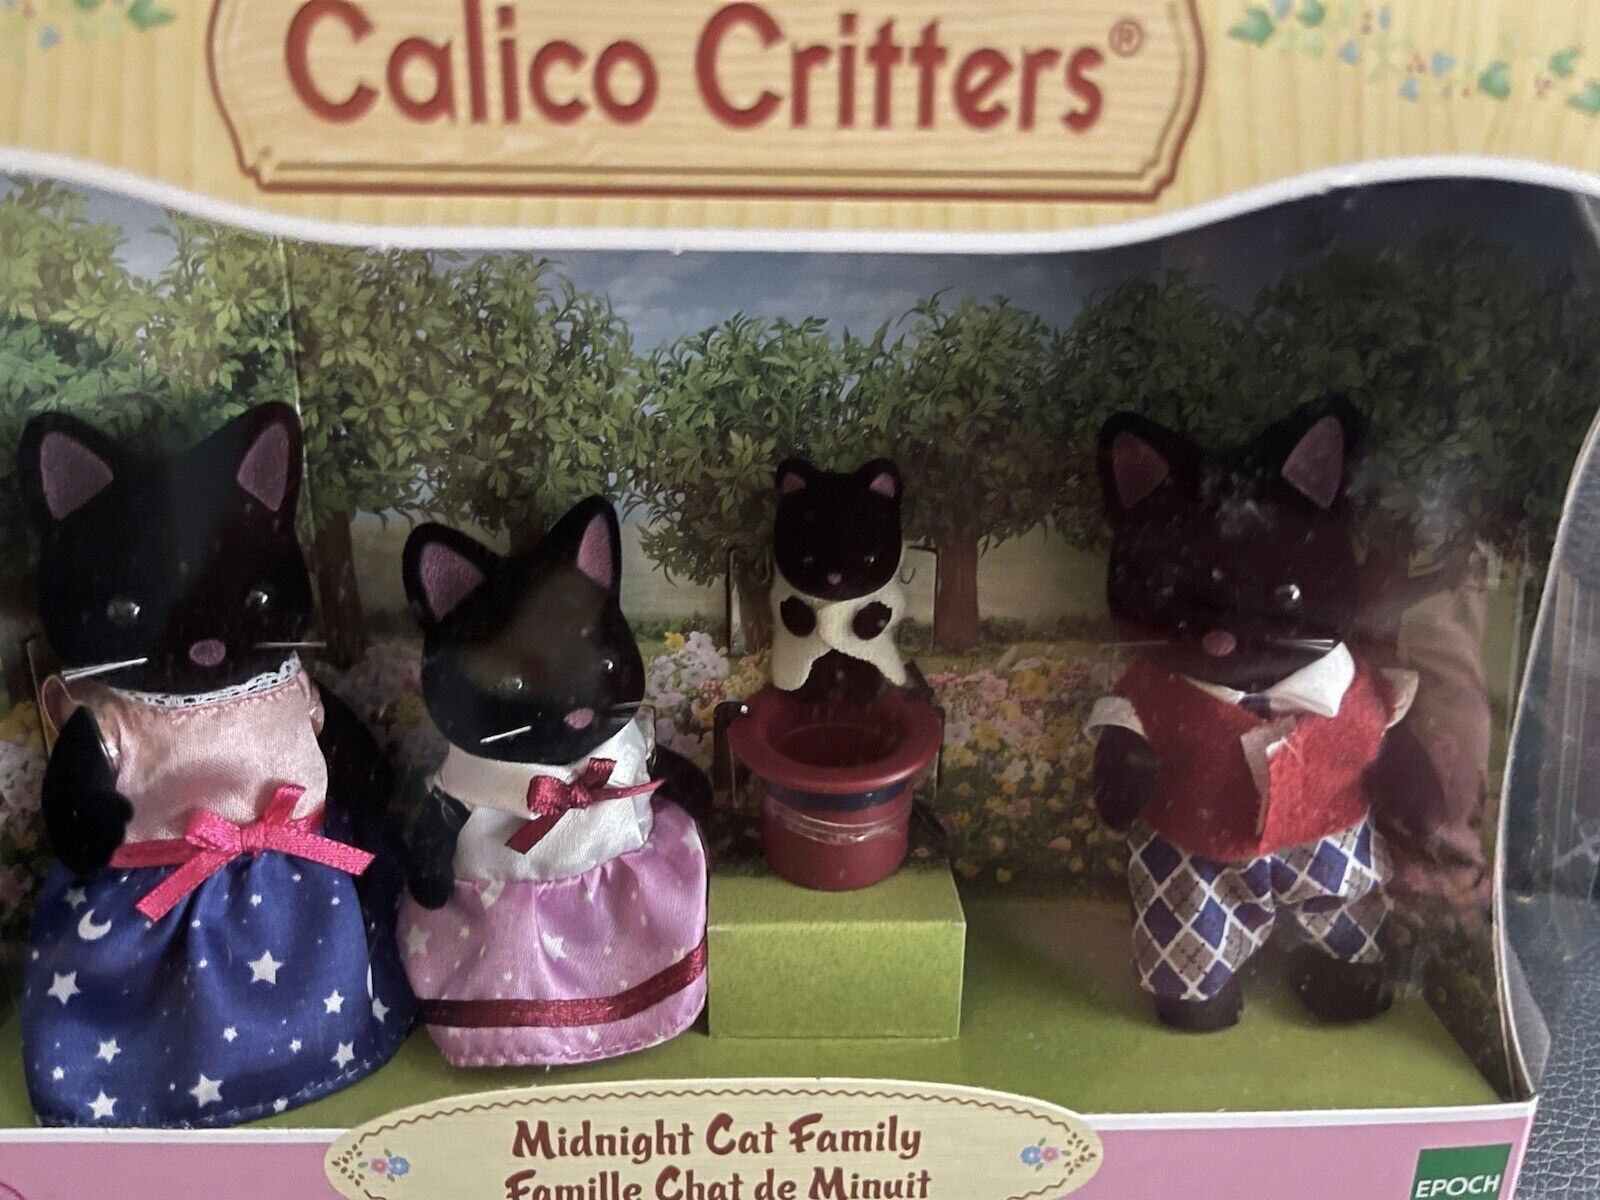 Calico Critters Sylvanian families MIDNIGHT CAT  Family NRFB retired